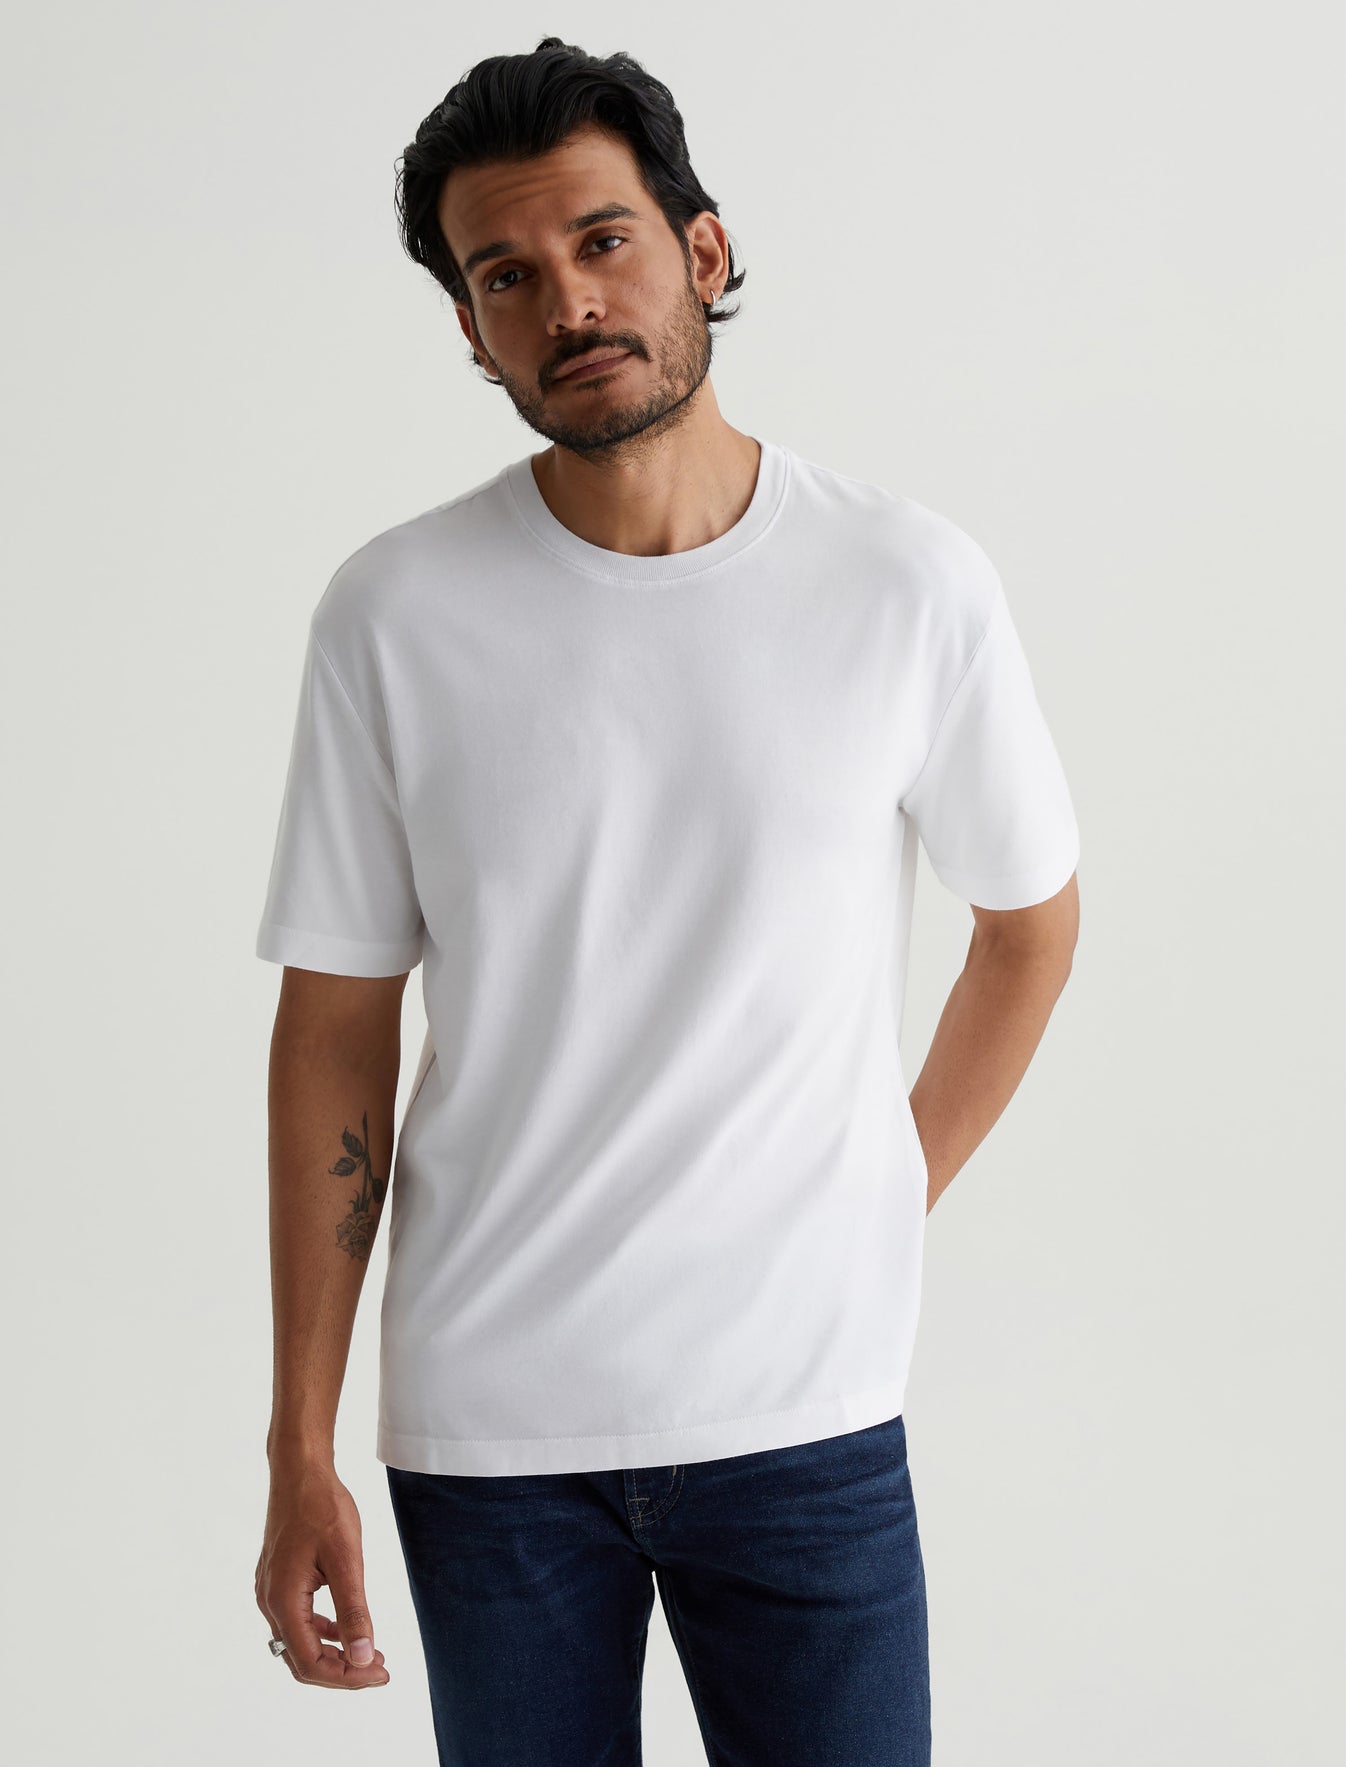 Wesley Crew True White Relaxed Fit Short Sleeve T-Shirt Mens Top Photo 1